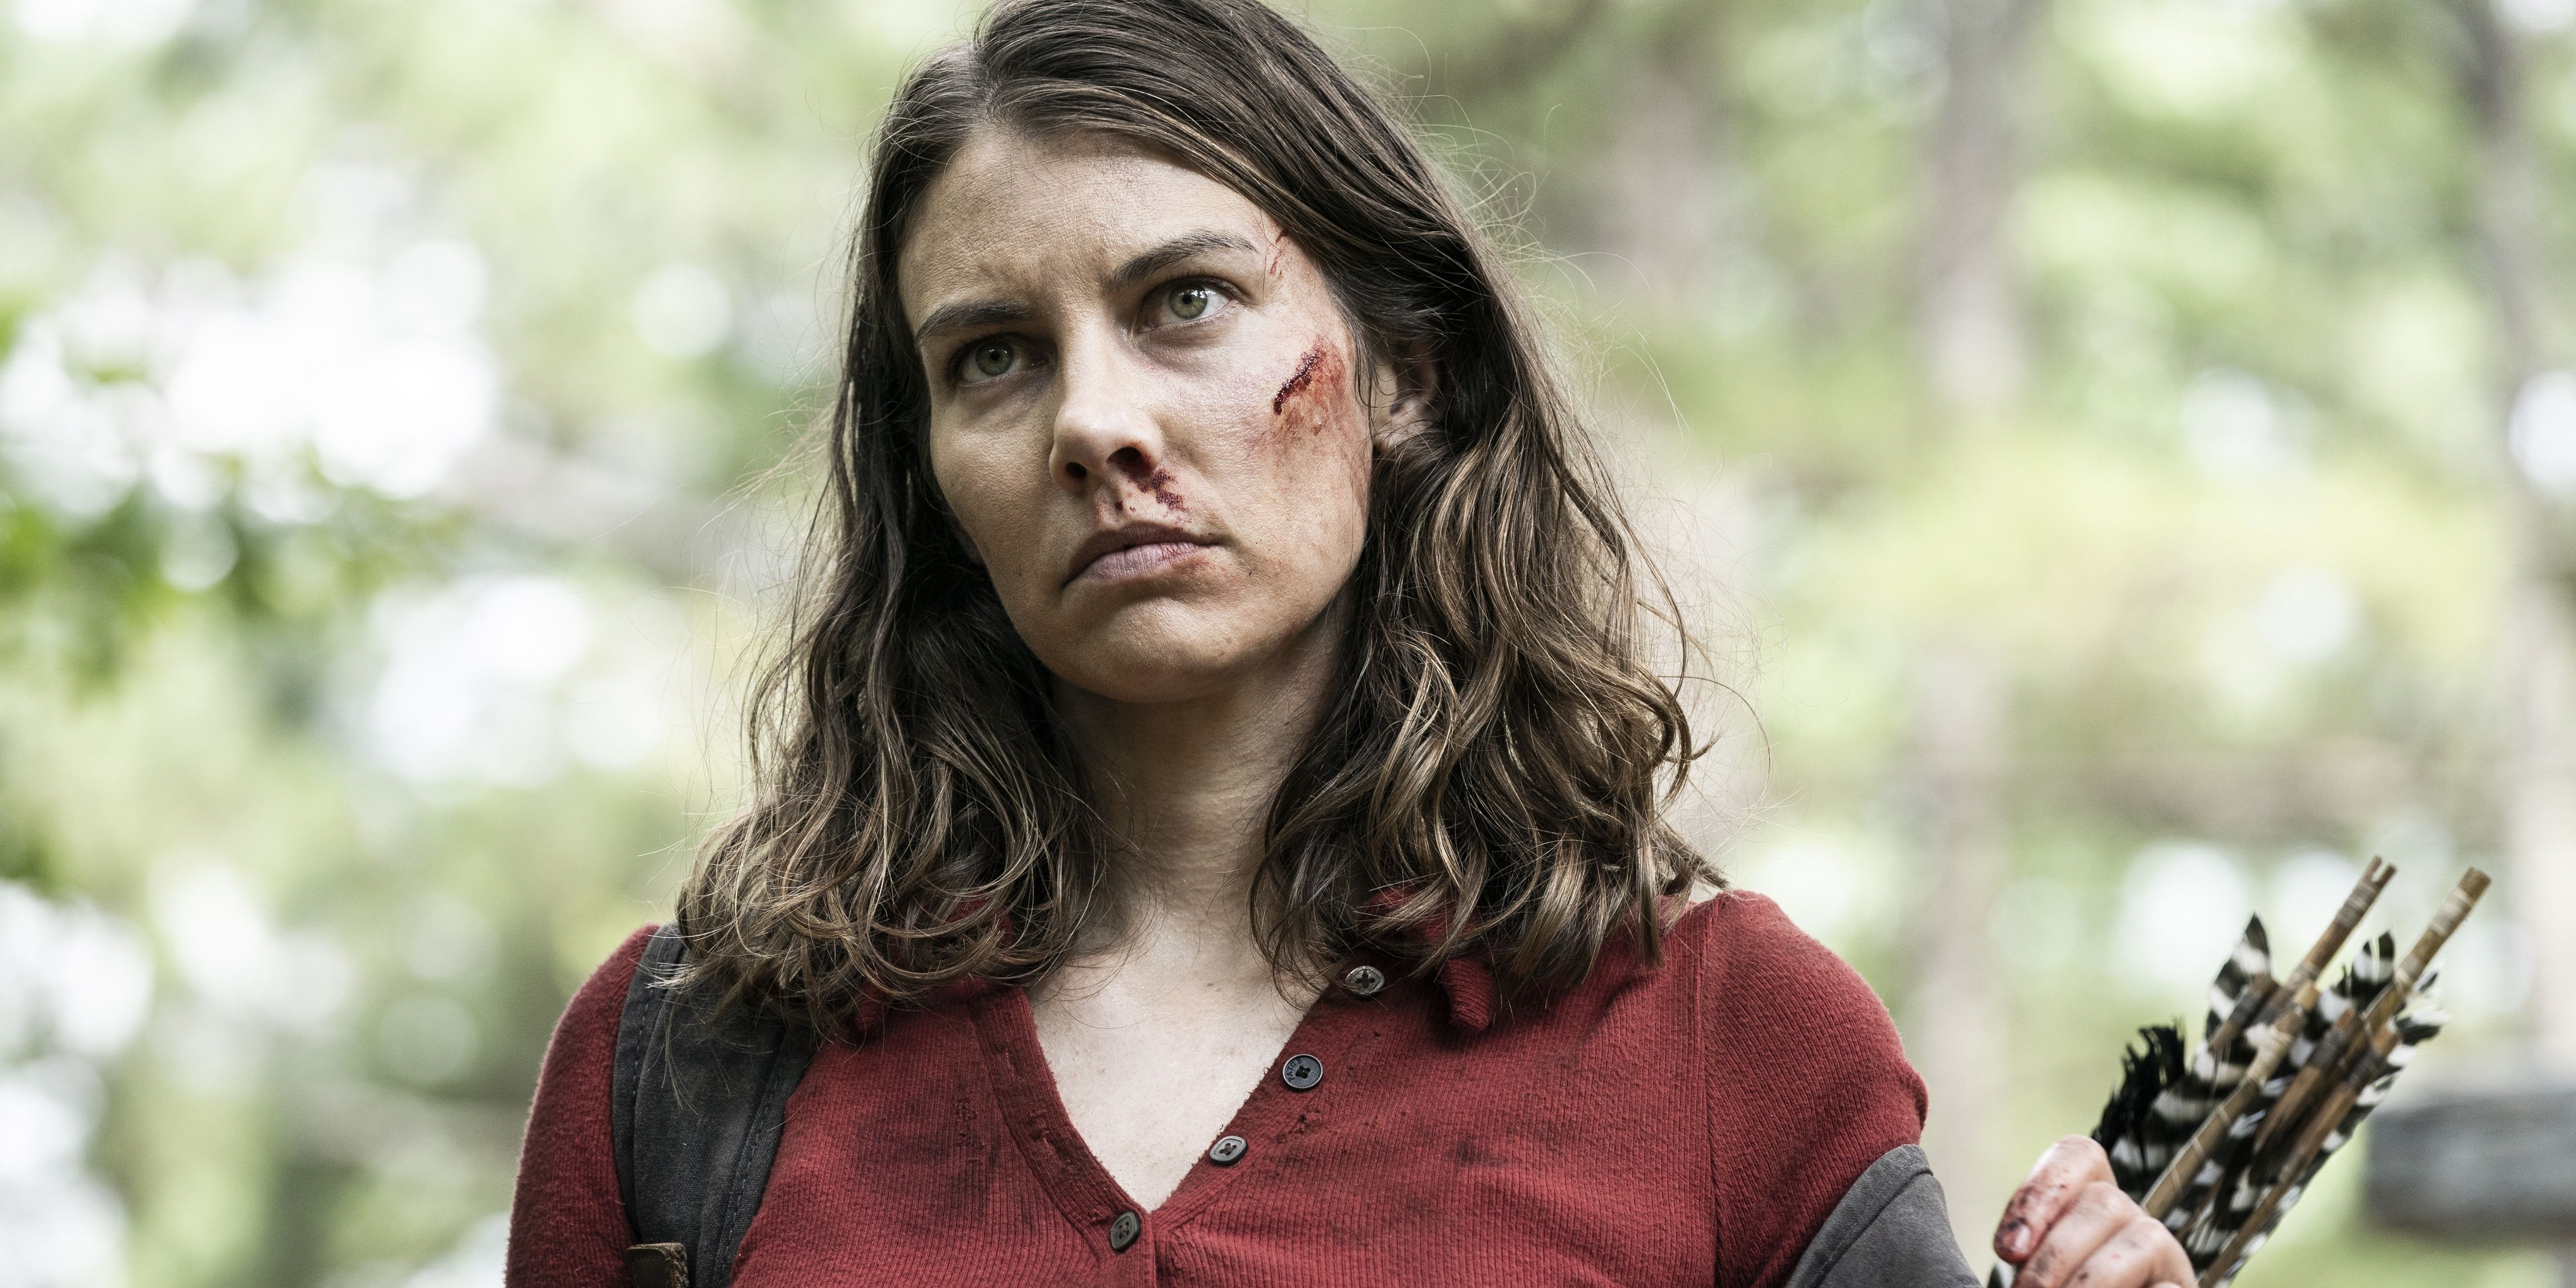 Lauren Cohan as Maggie in The Walking Dead holding a quiver